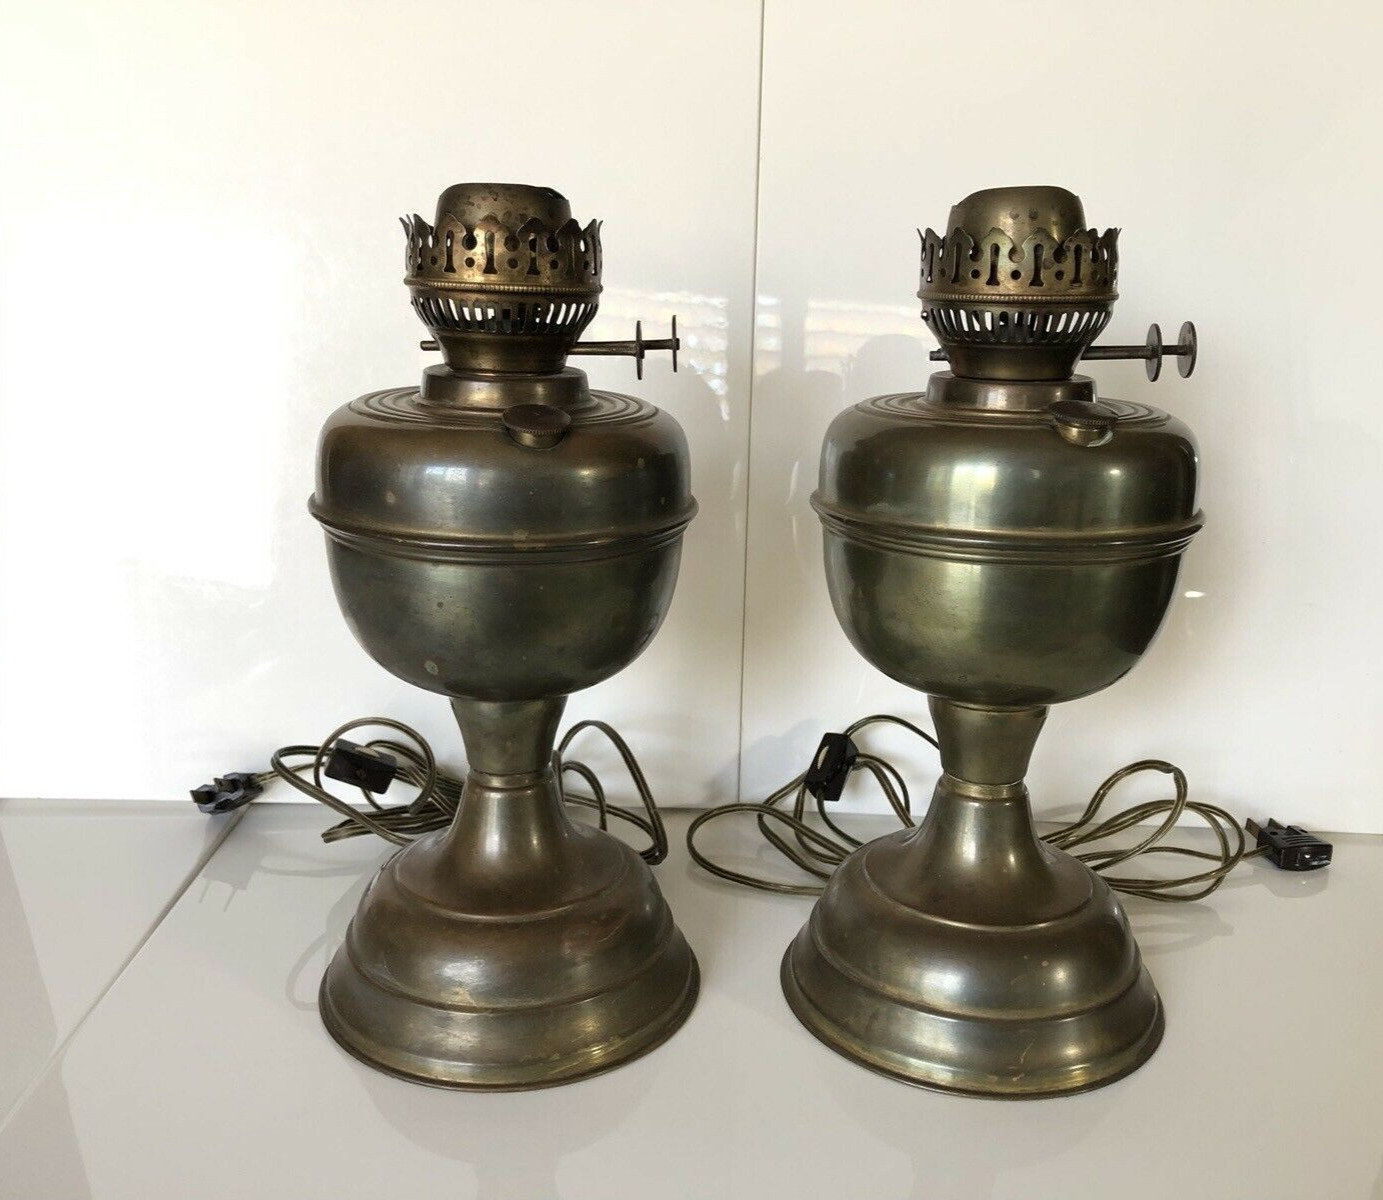 Pair of Vtg Duplex Oil Lamp Converted to an Electric Table Lamps Made in England